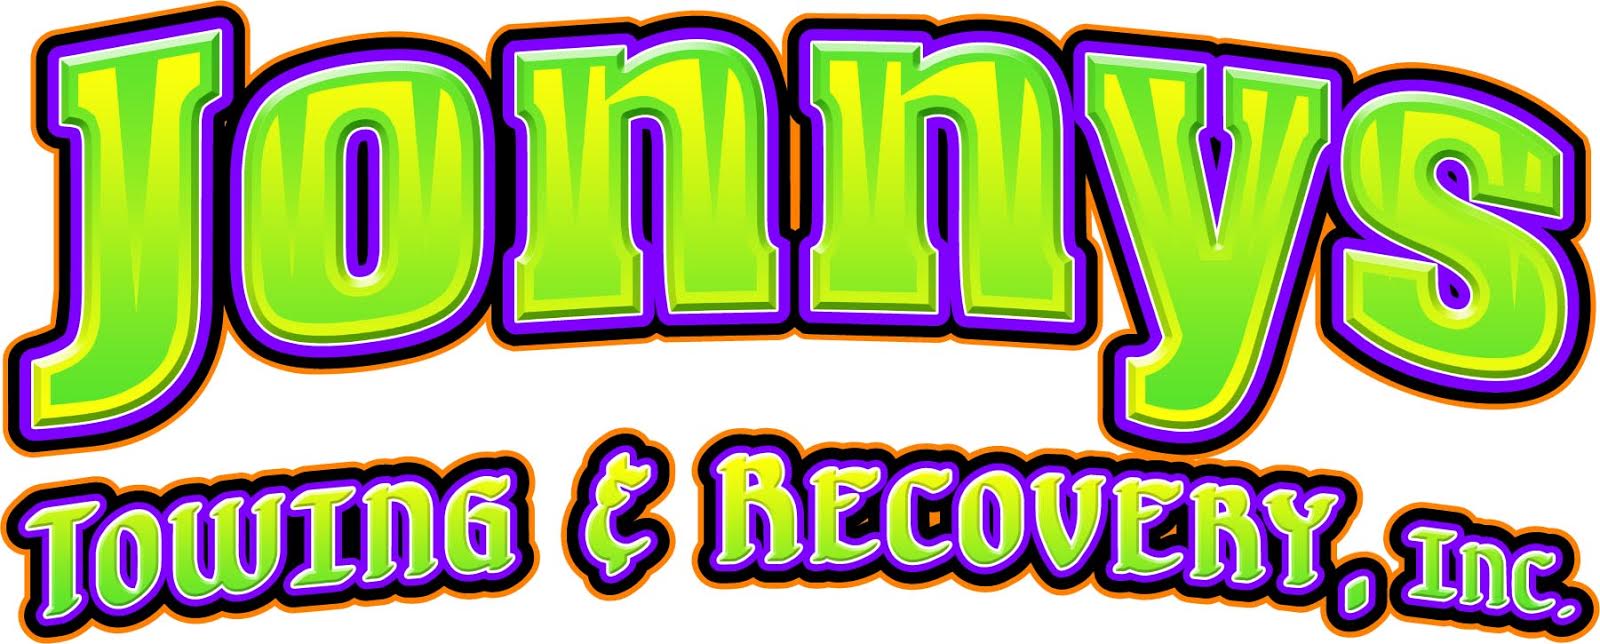 Jonny’s Towing & Recovery Inc